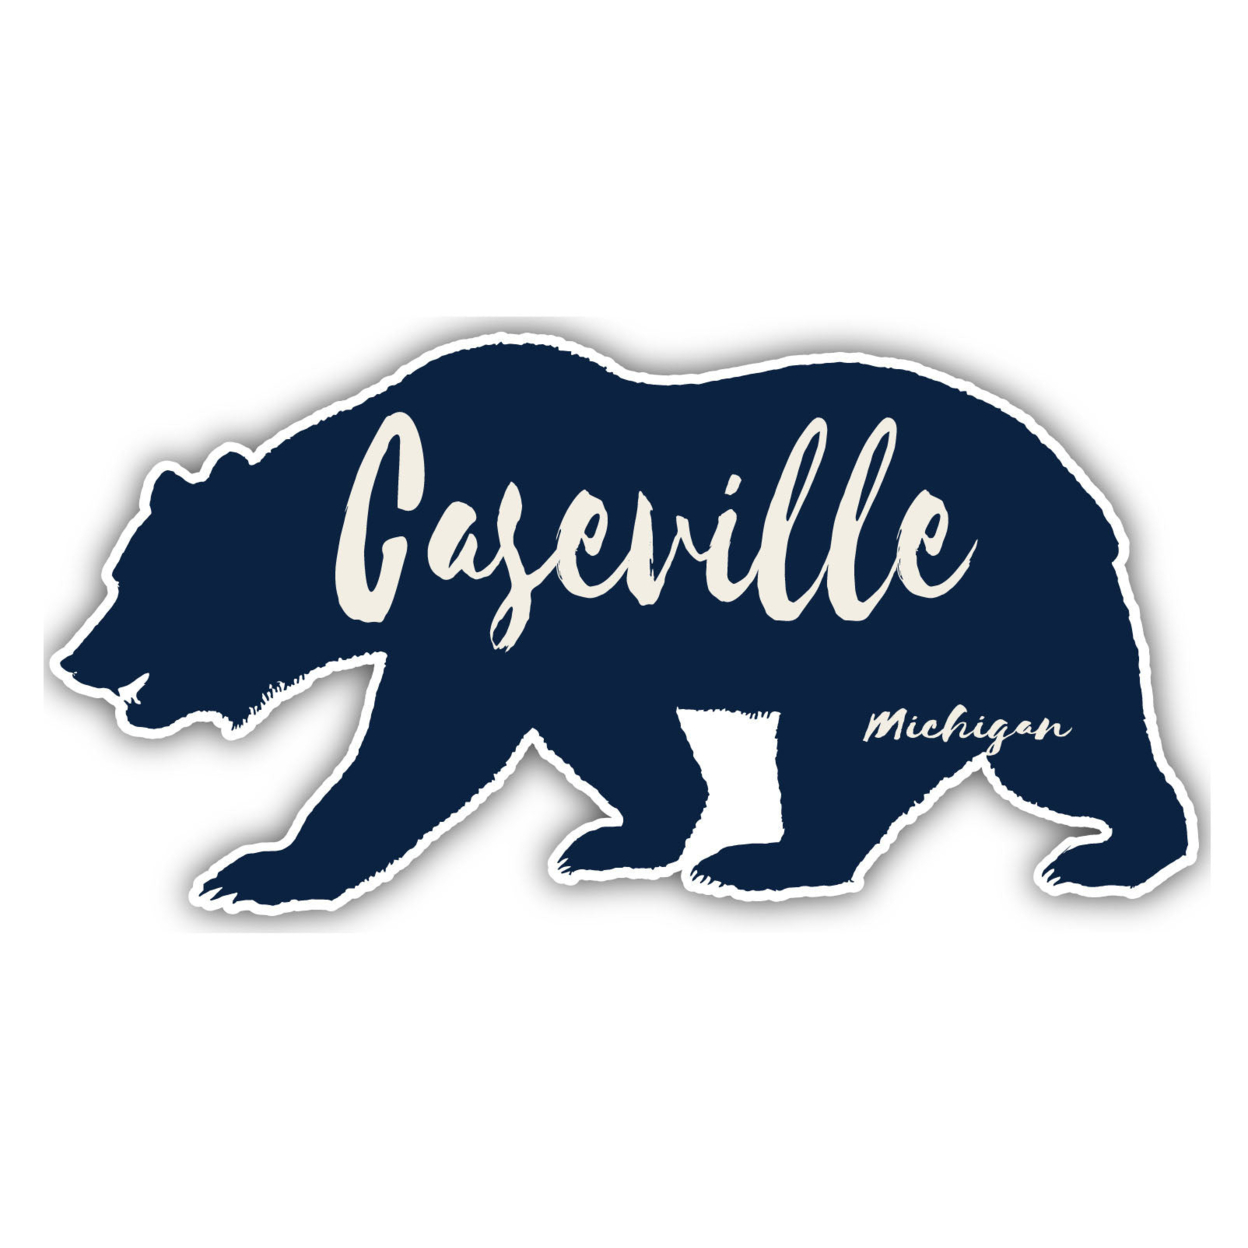 Caseville Michigan Souvenir Decorative Stickers (Choose Theme And Size) - 4-Pack, 2-Inch, Great Outdoors